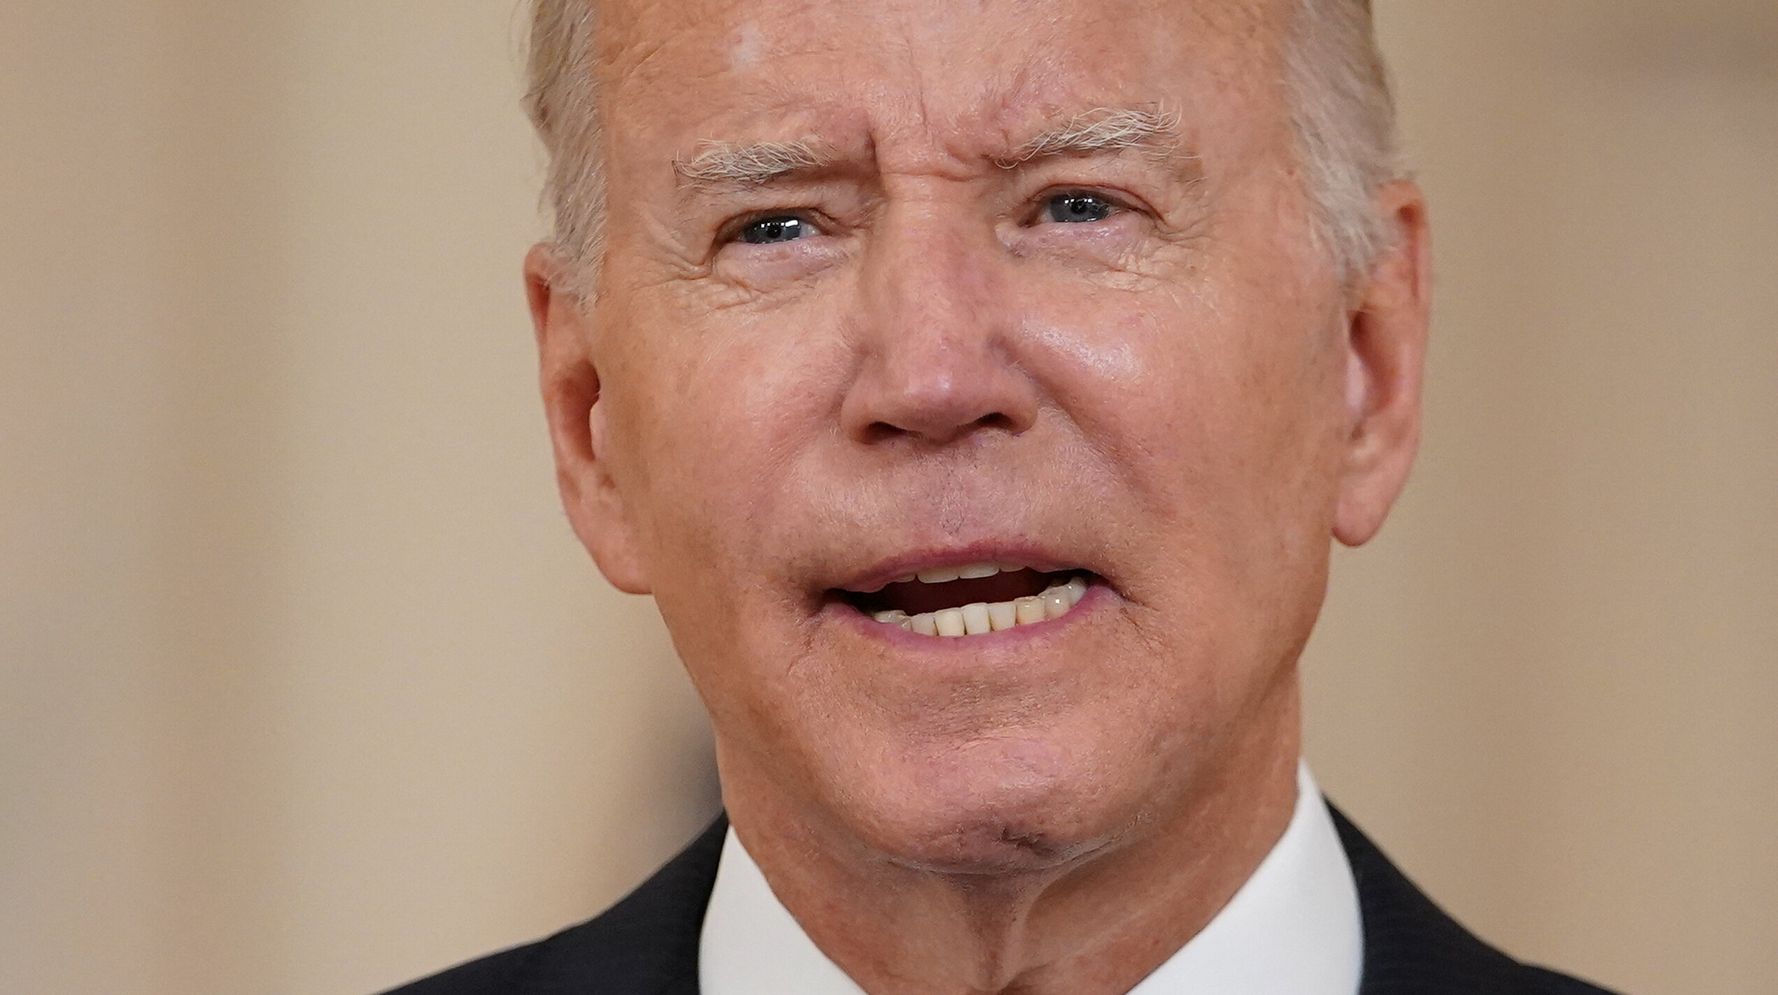 Biden Quickly Shuts Down Democrats’ Calls To Expand Court Post-Roe Decision